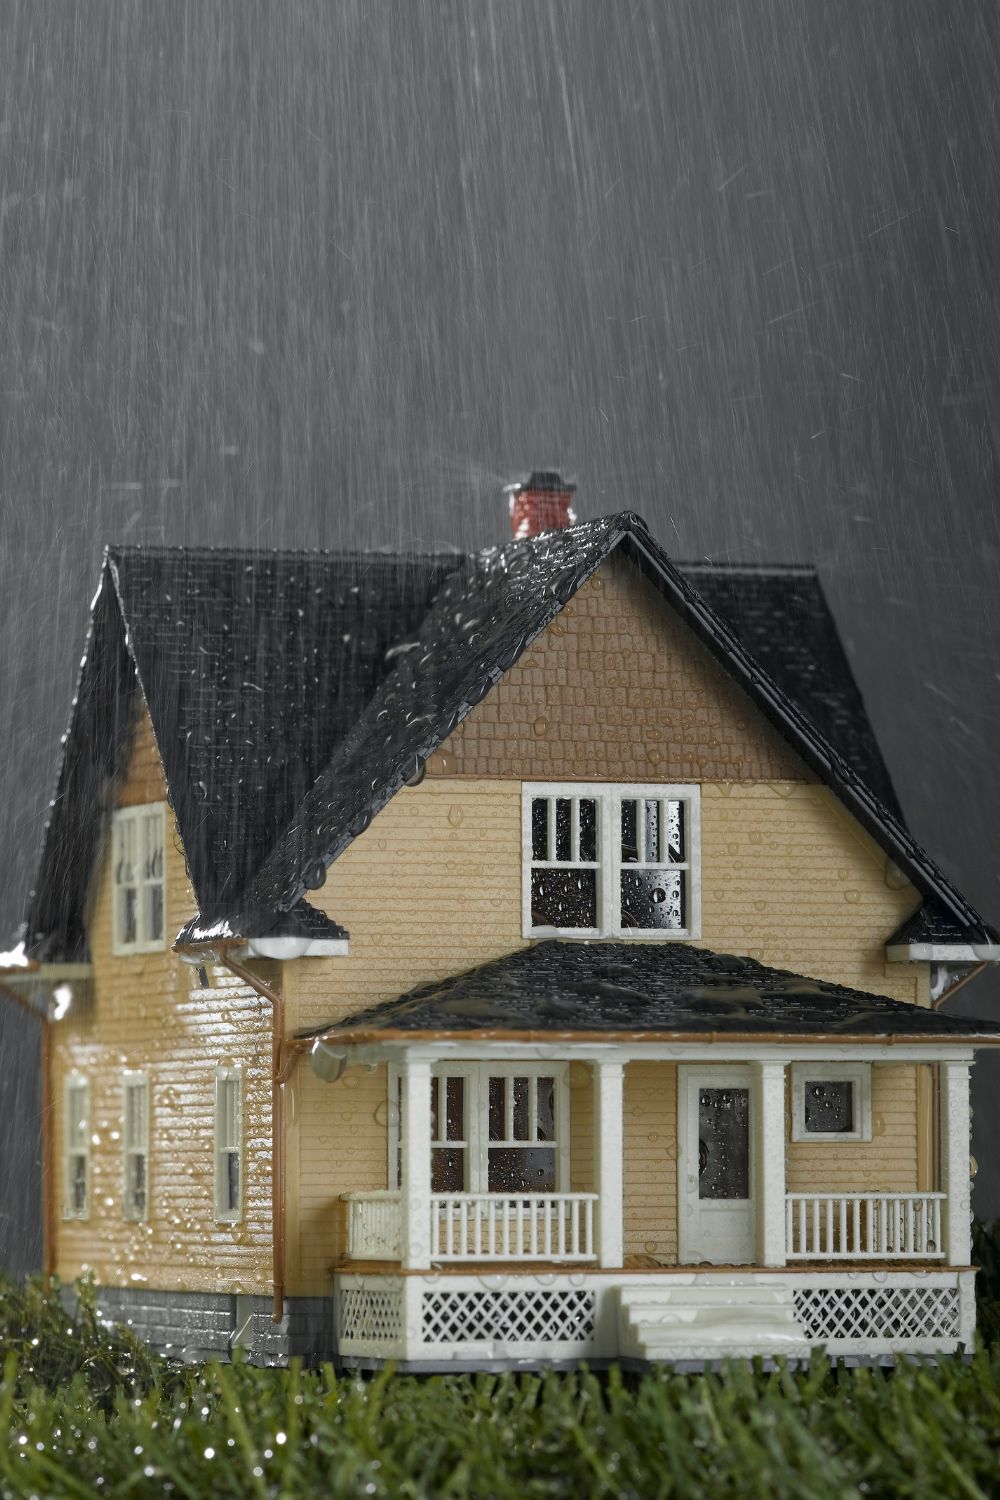 Check out some easy ways to protect your home from natural disasters